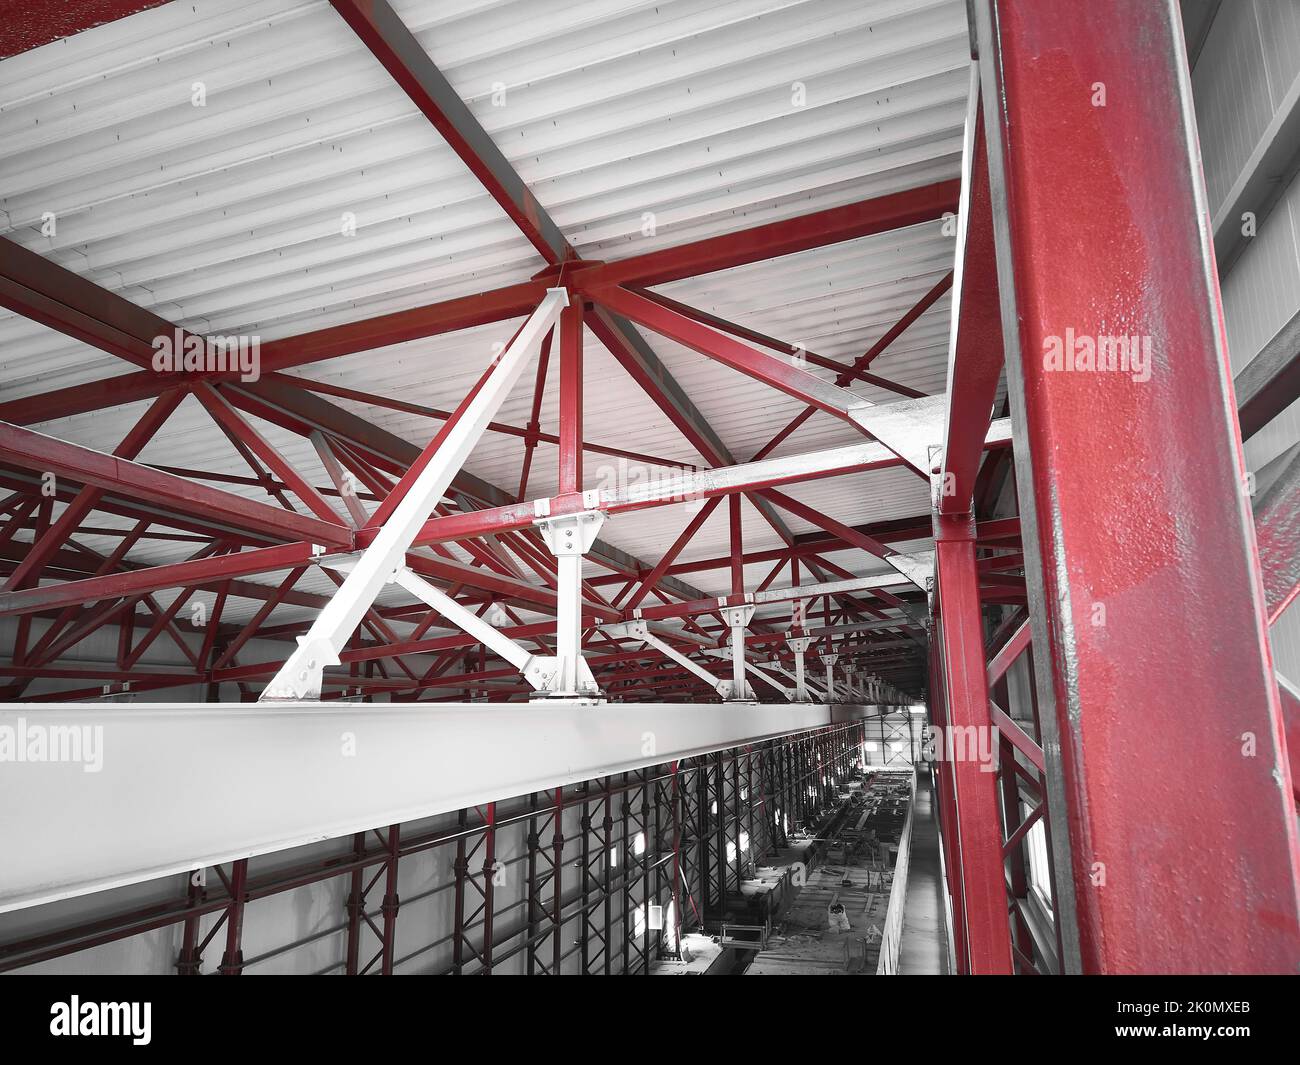 Metal framework structures of industrial building Stock Photo